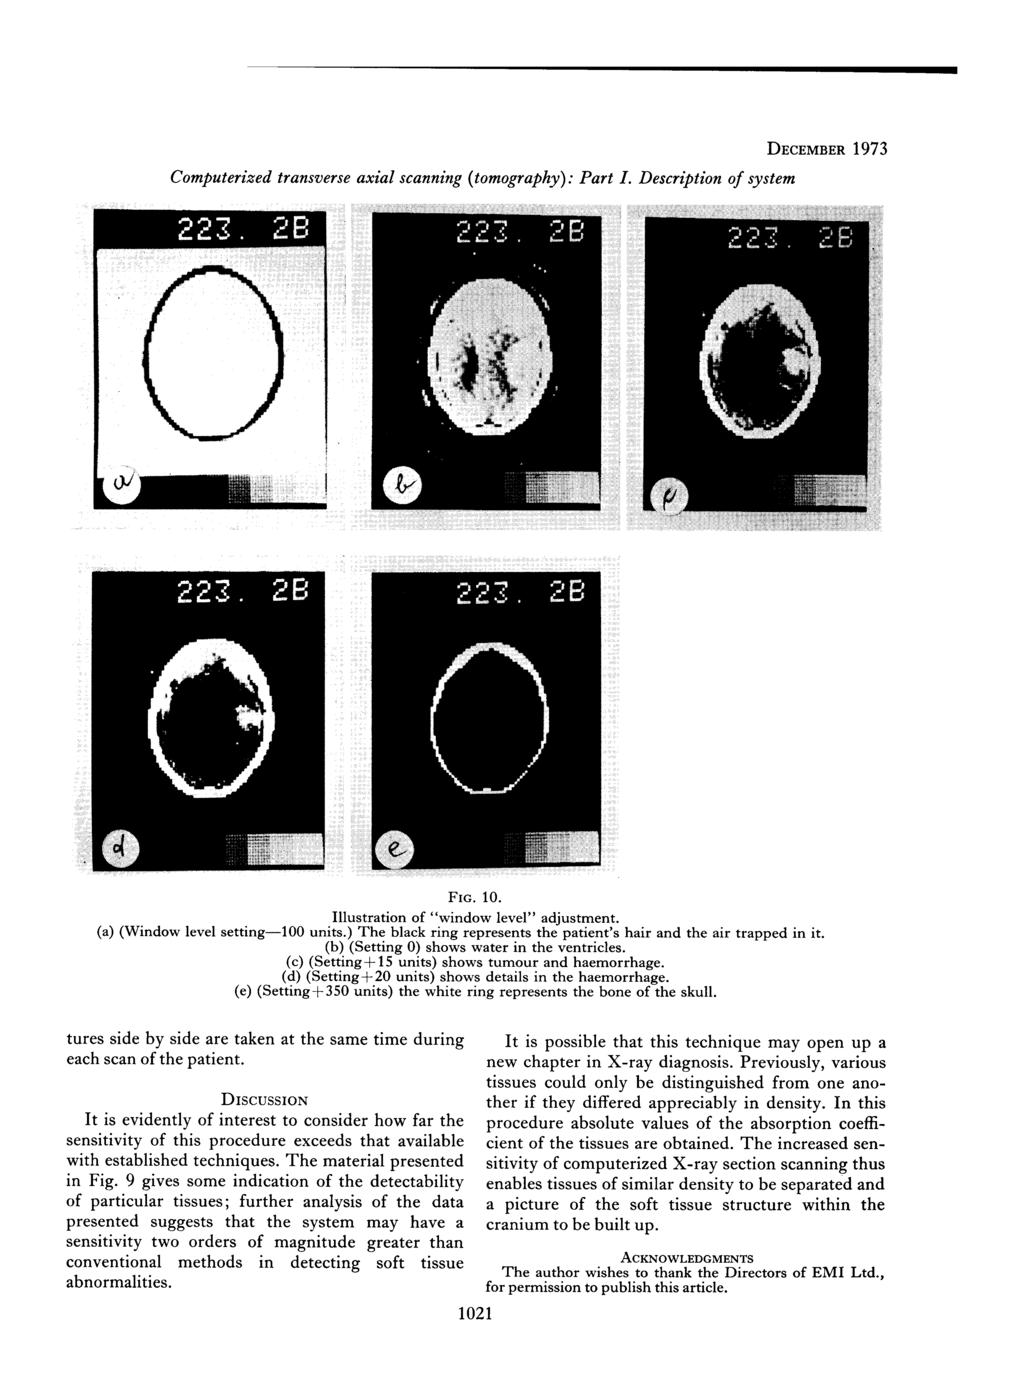 Computerized transverse axial scanning {tomography): Part I. Description of system DECEMBER 1973 FIG. 10. Illustration of "window level" adjustment, (a) (Window level setting 100 units.